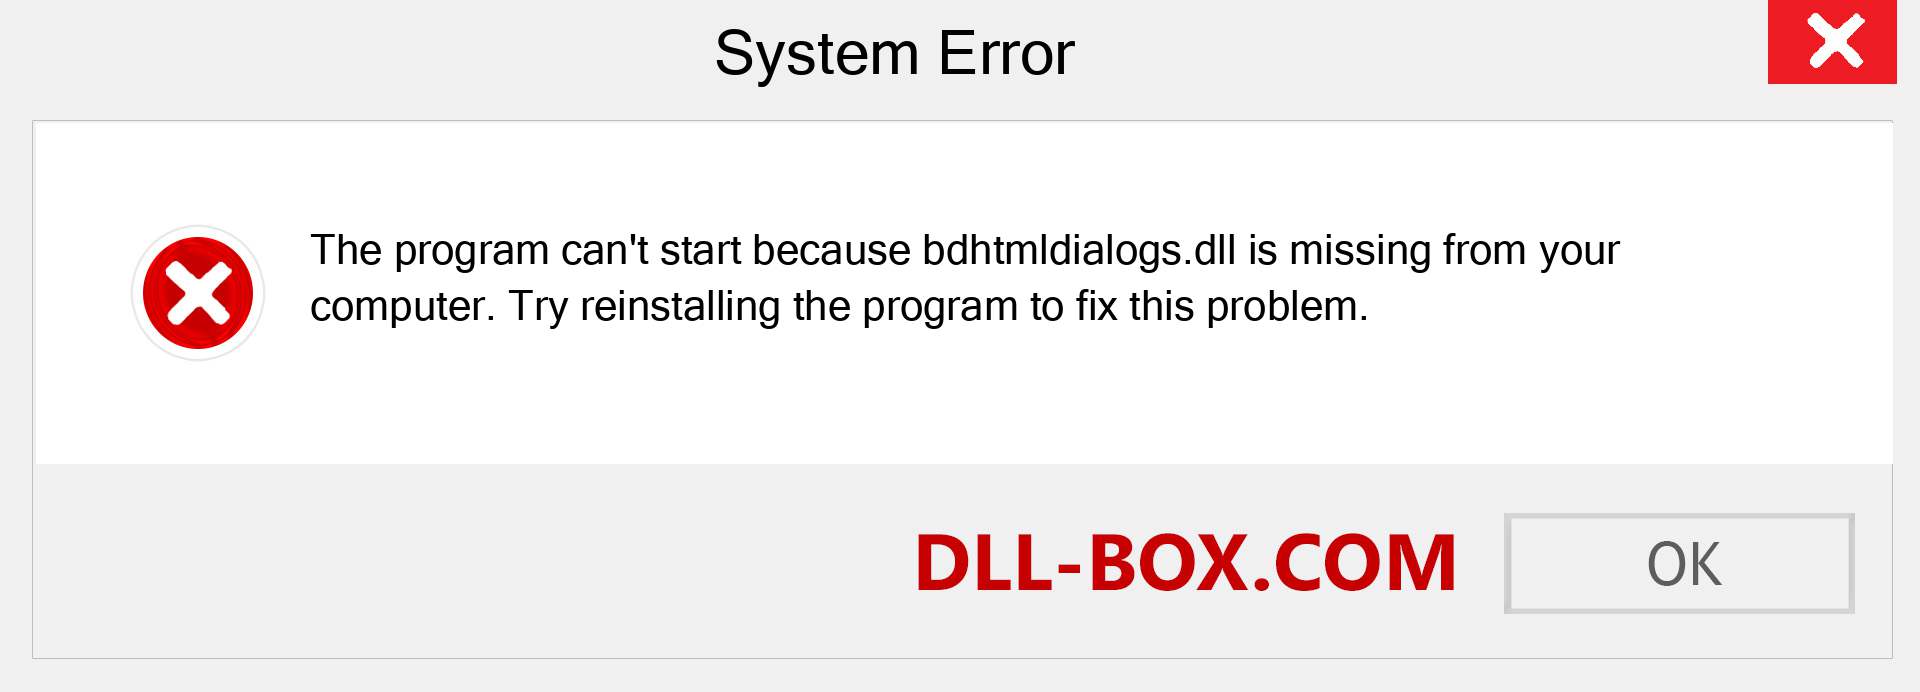  bdhtmldialogs.dll file is missing?. Download for Windows 7, 8, 10 - Fix  bdhtmldialogs dll Missing Error on Windows, photos, images